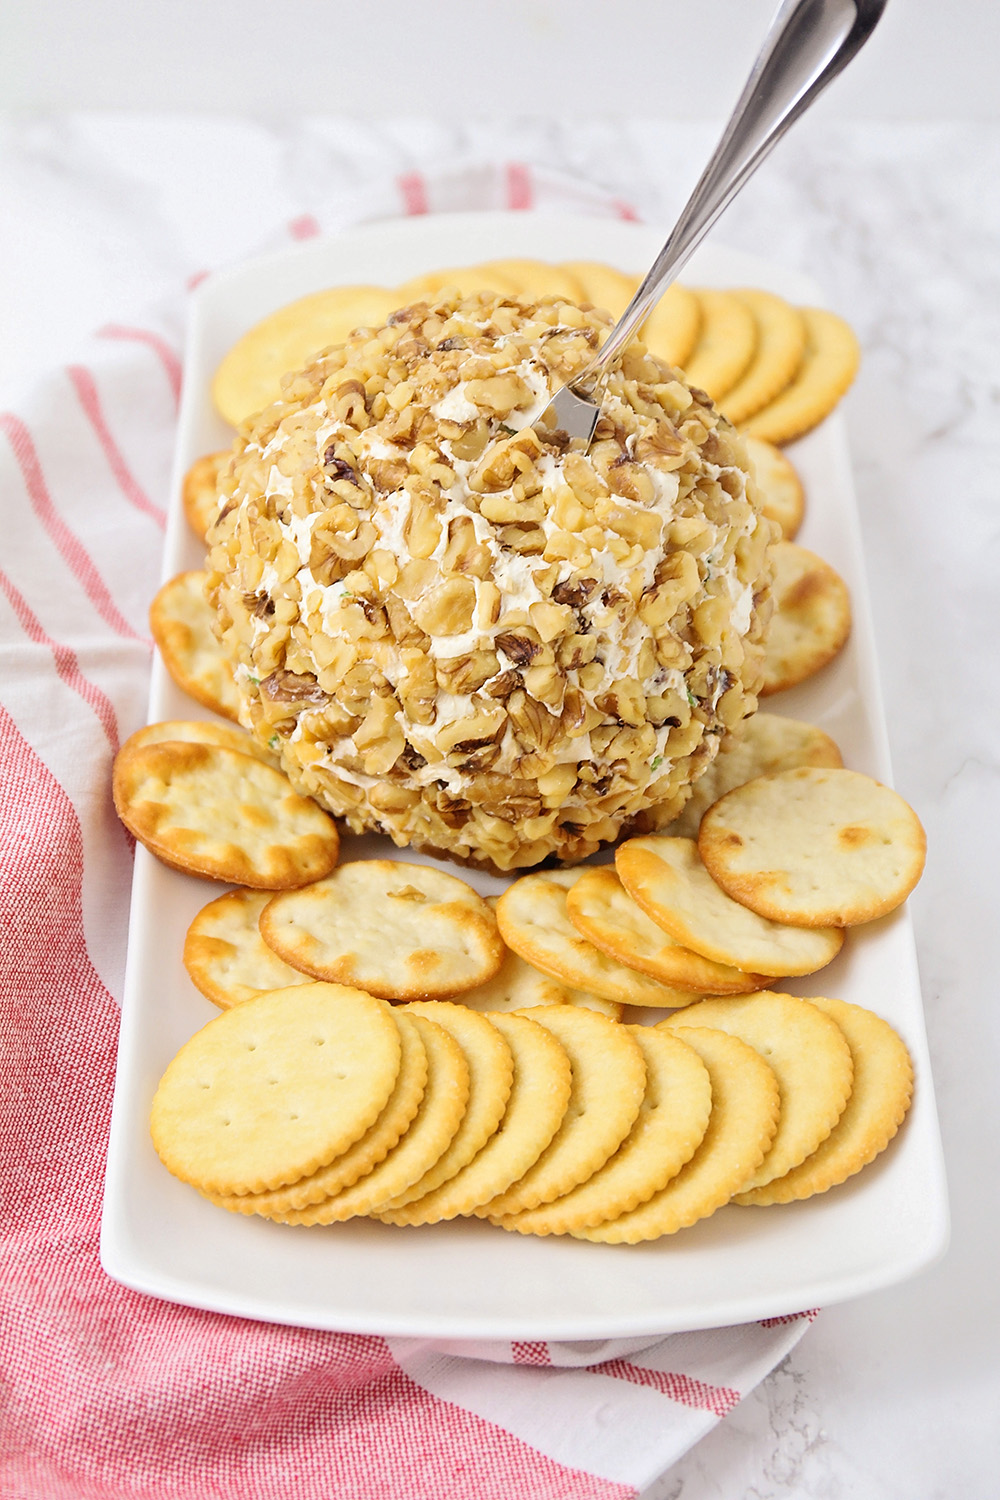 This savory and flavorful bacon cheddar cheeseball is so easy to make, and so delicious. It's the perfect party appetizer!